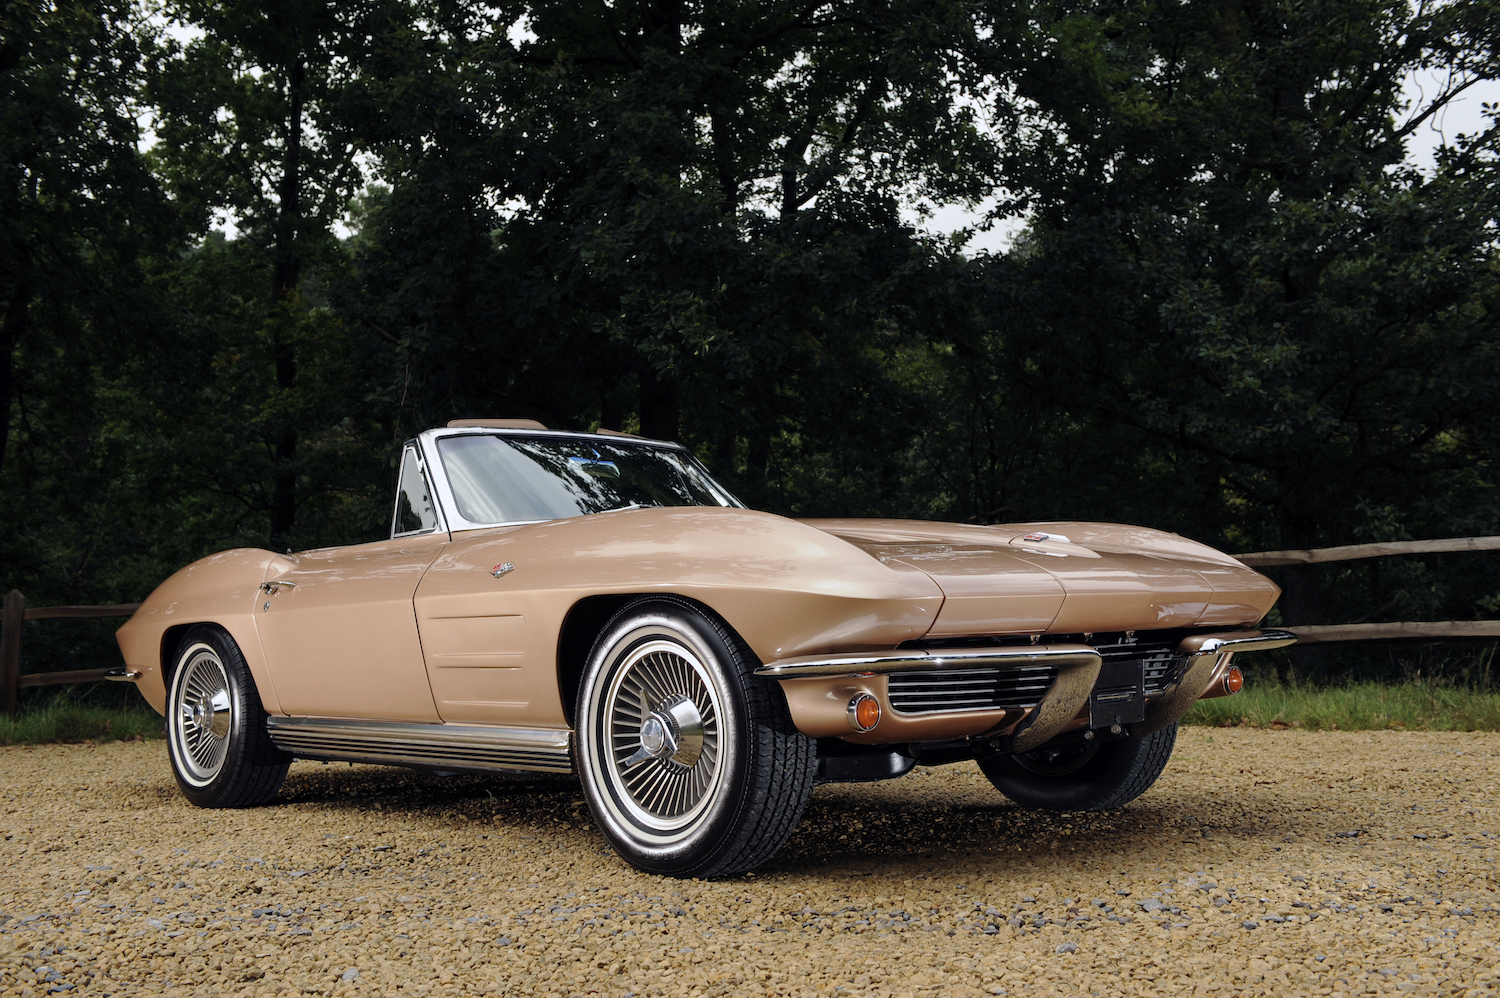 This is the 1964 Chevrolet Corvette "Stingray" generation. This Corvette Z06 V8 was a fuel-injected 327 cubic-inch small-block that set horsepower records with 375 ponies. | National Motor Museum/Heritage Images/Getty Images